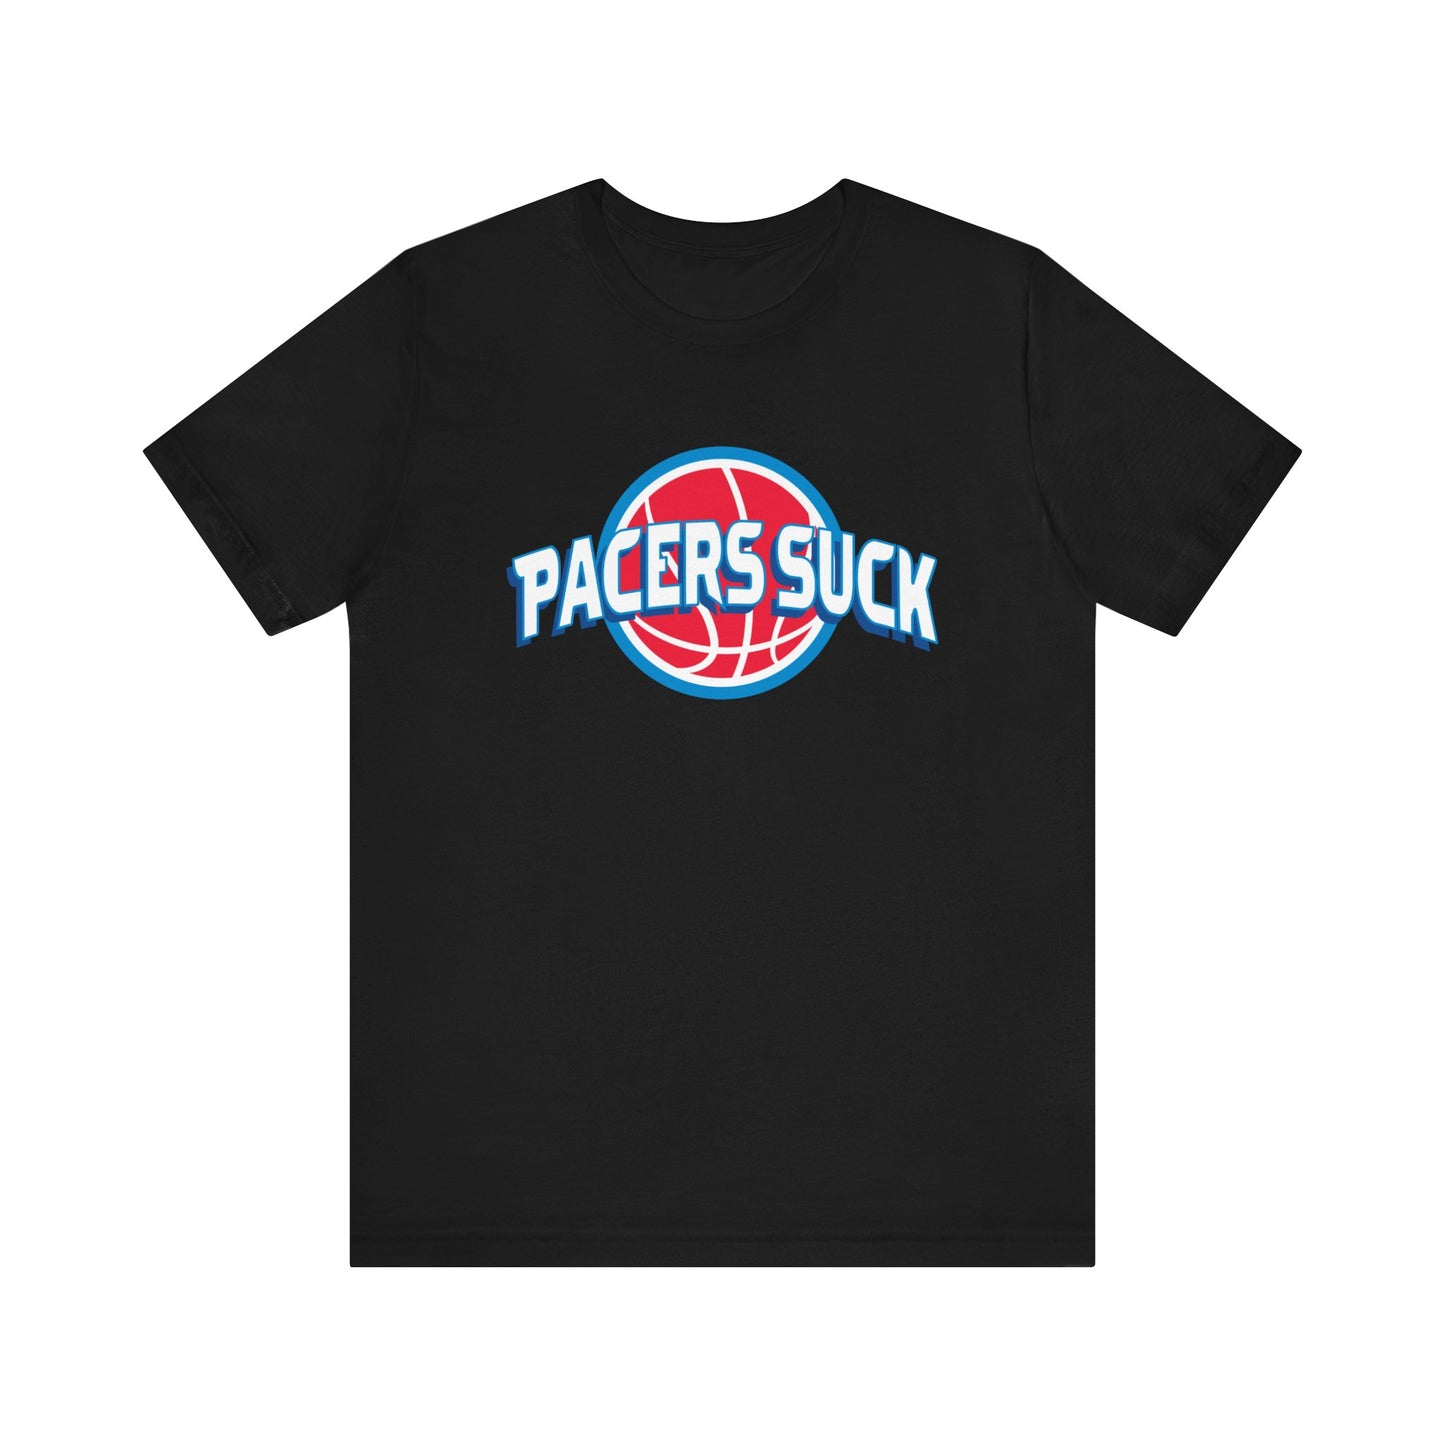 Paysers Suck (for Detroit fans) - Unisex Jersey Short Sleeve Tee